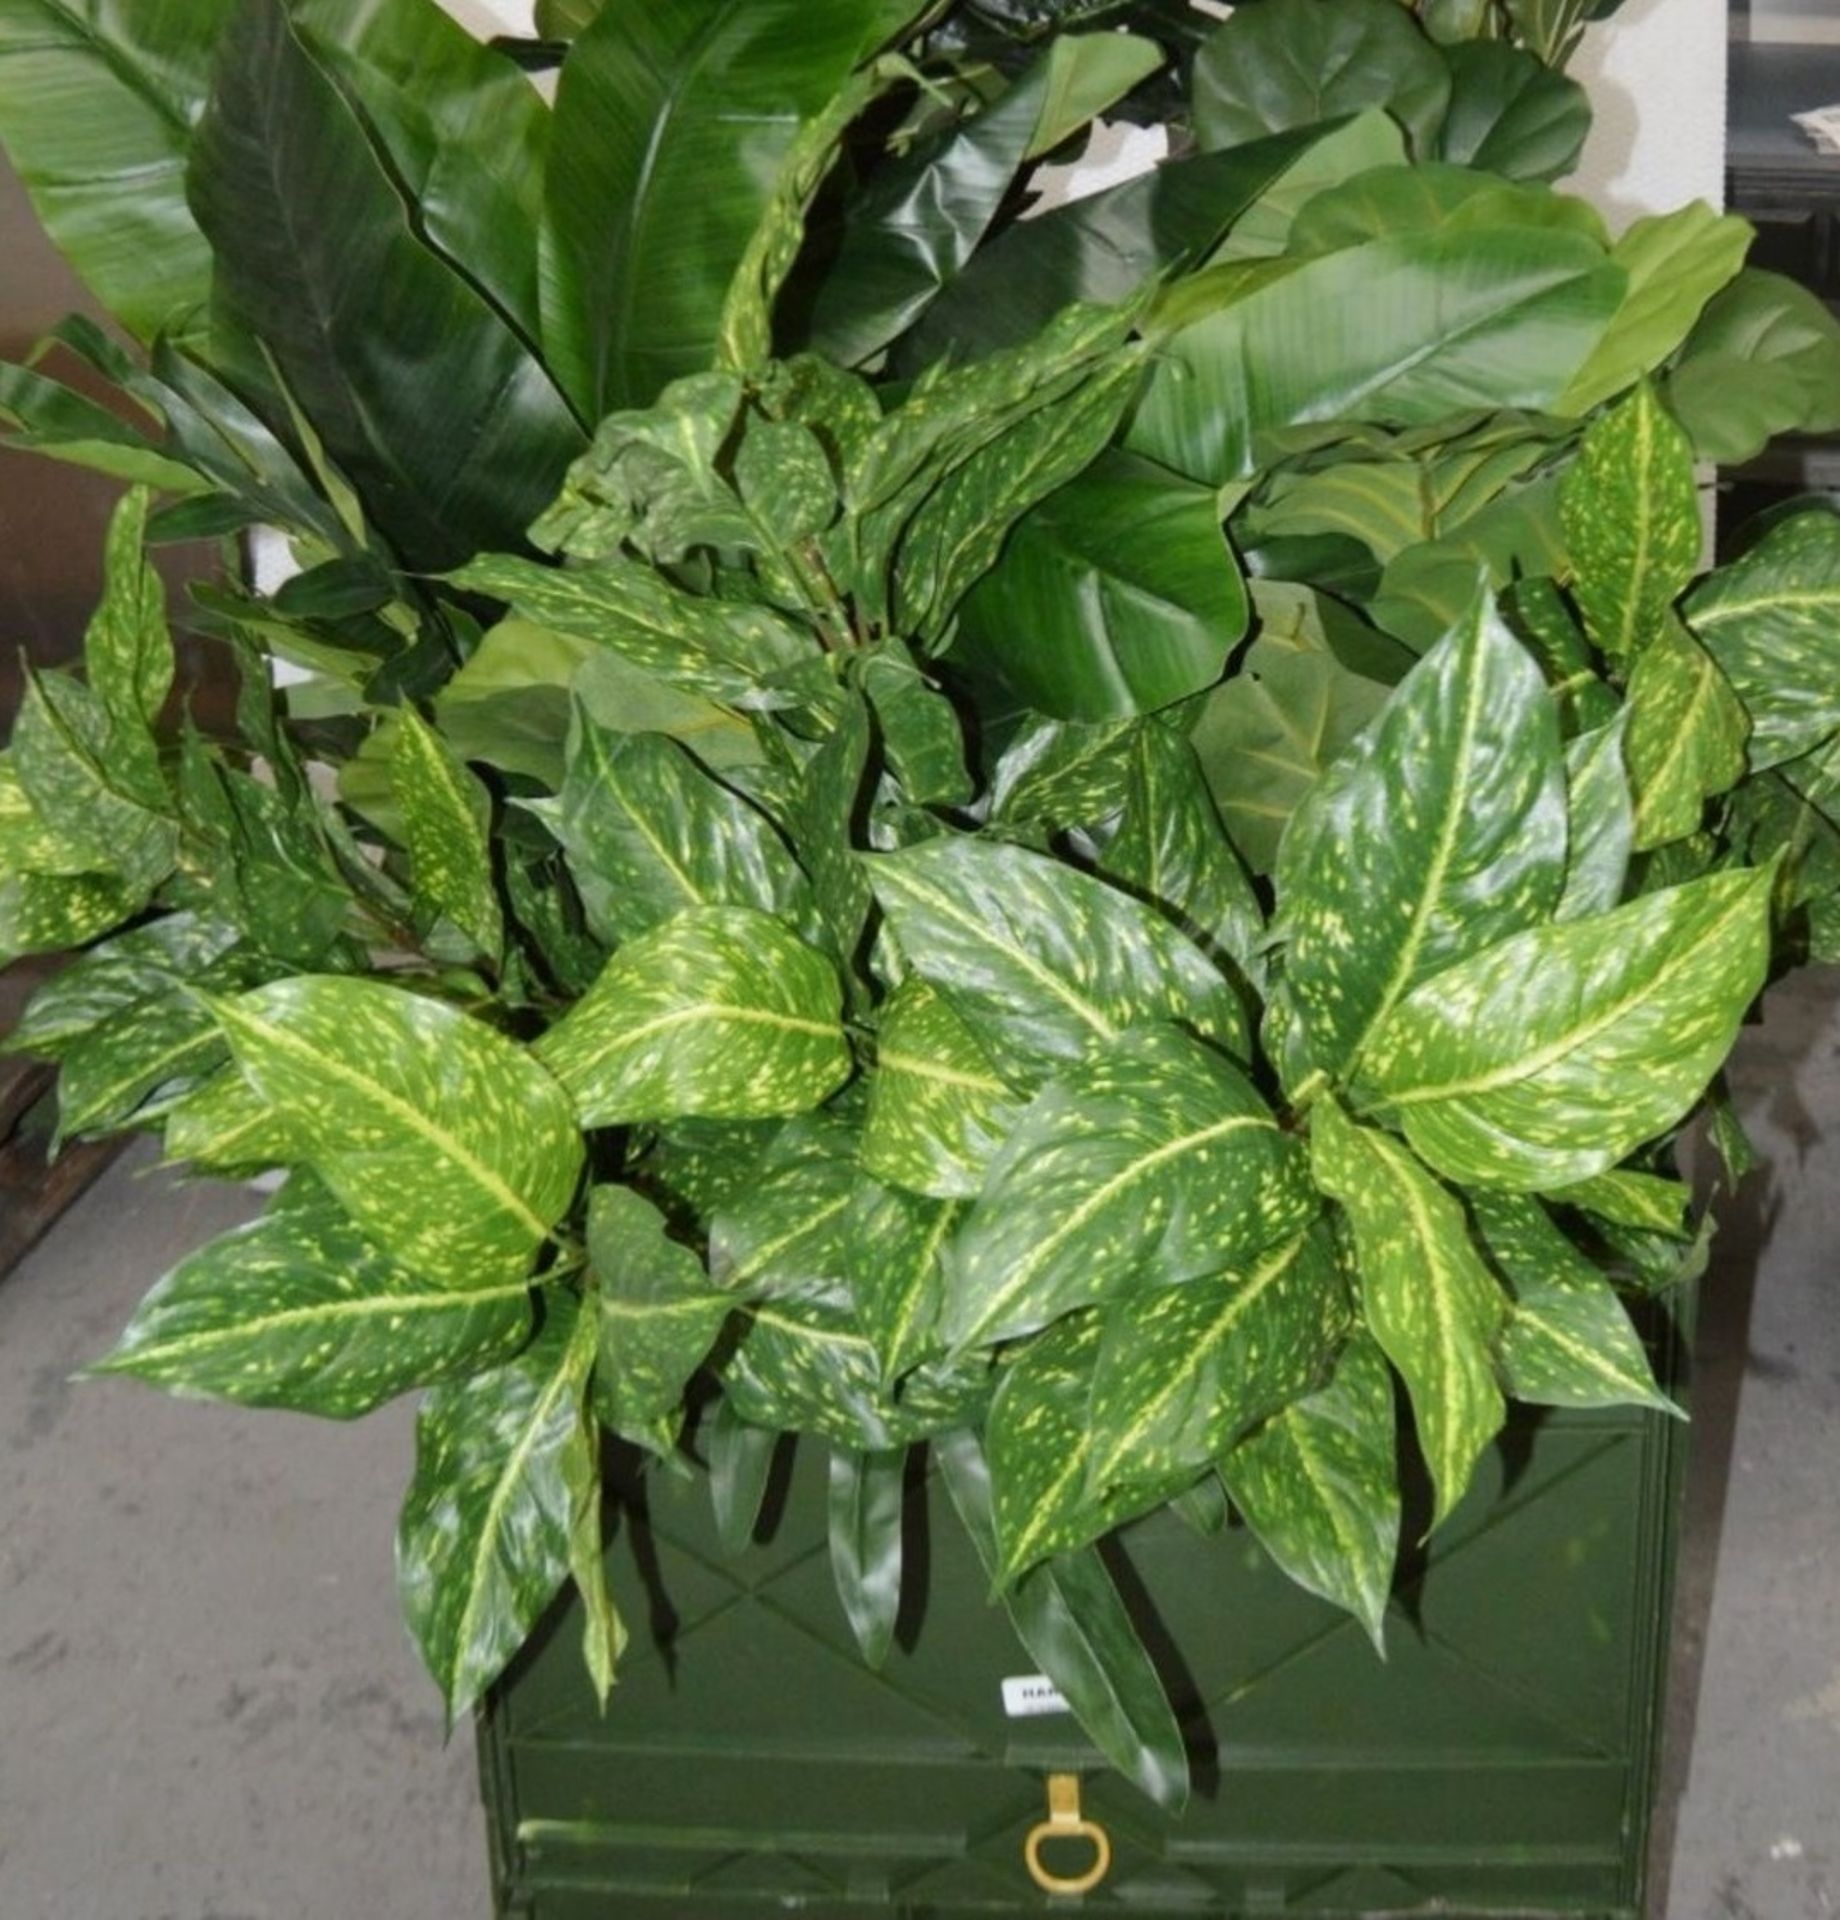 3 x Commercial Artificial Potted Plants Display - High Quality Ex-Display Showroom Pieces - Ref: